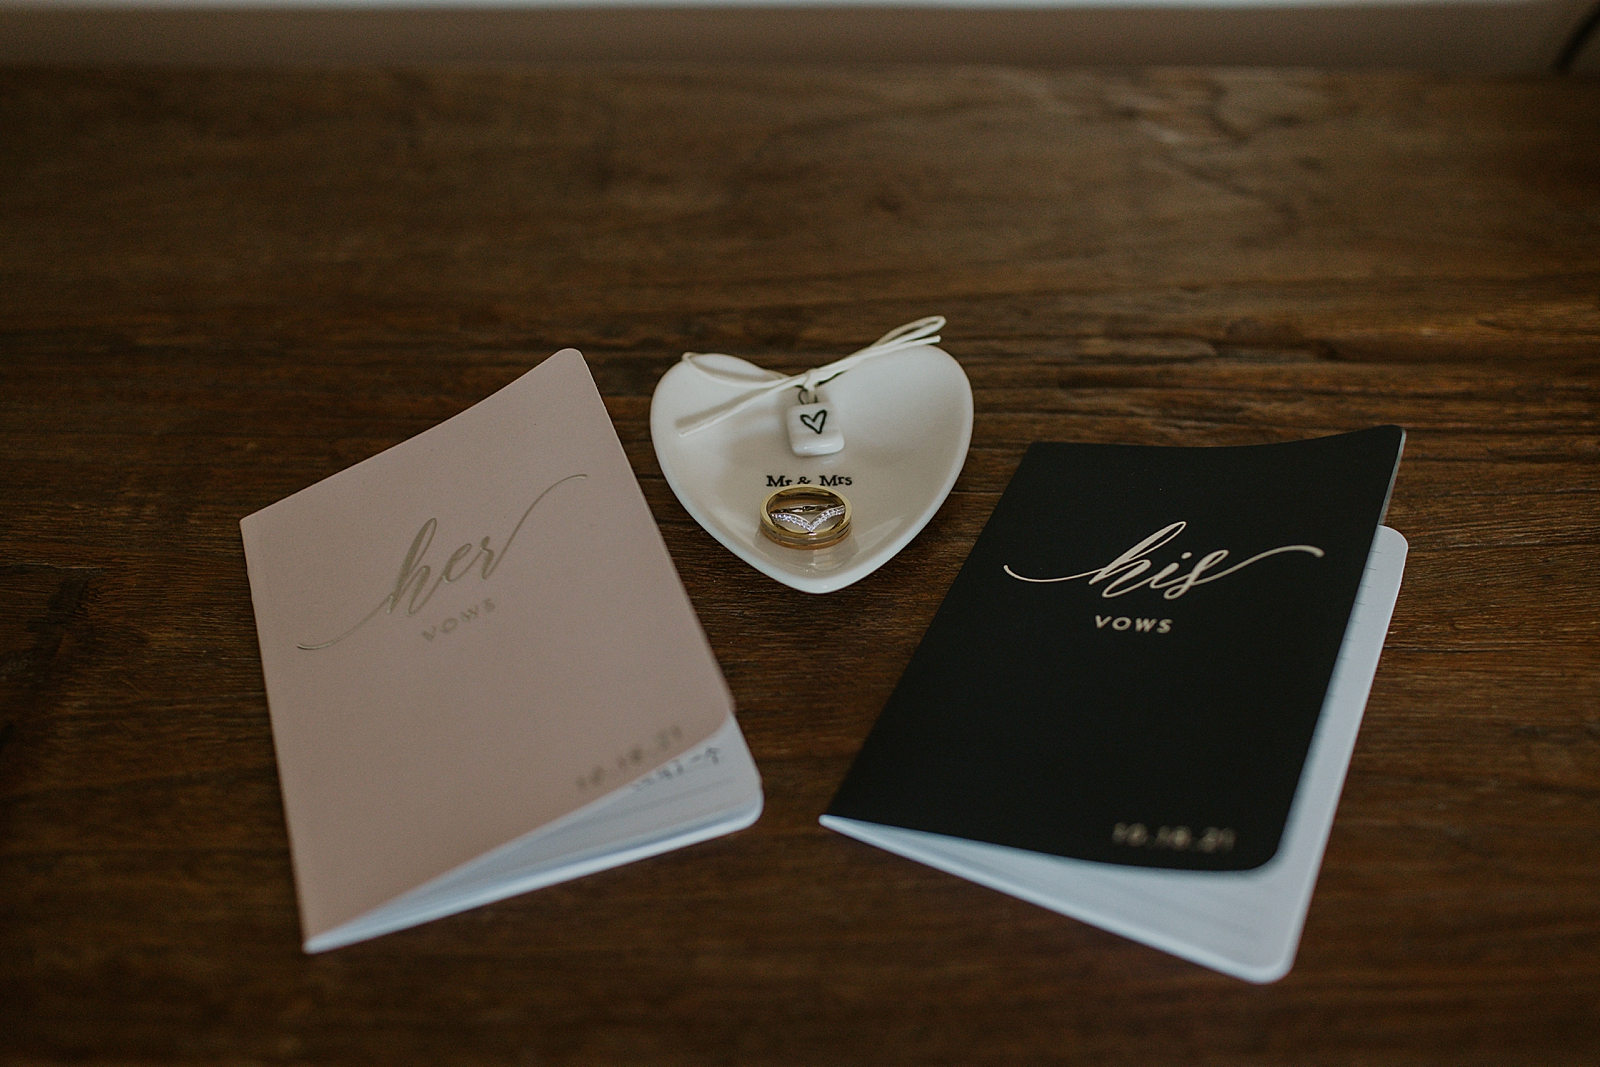 Detail shot of his and her vow books with wedding bands